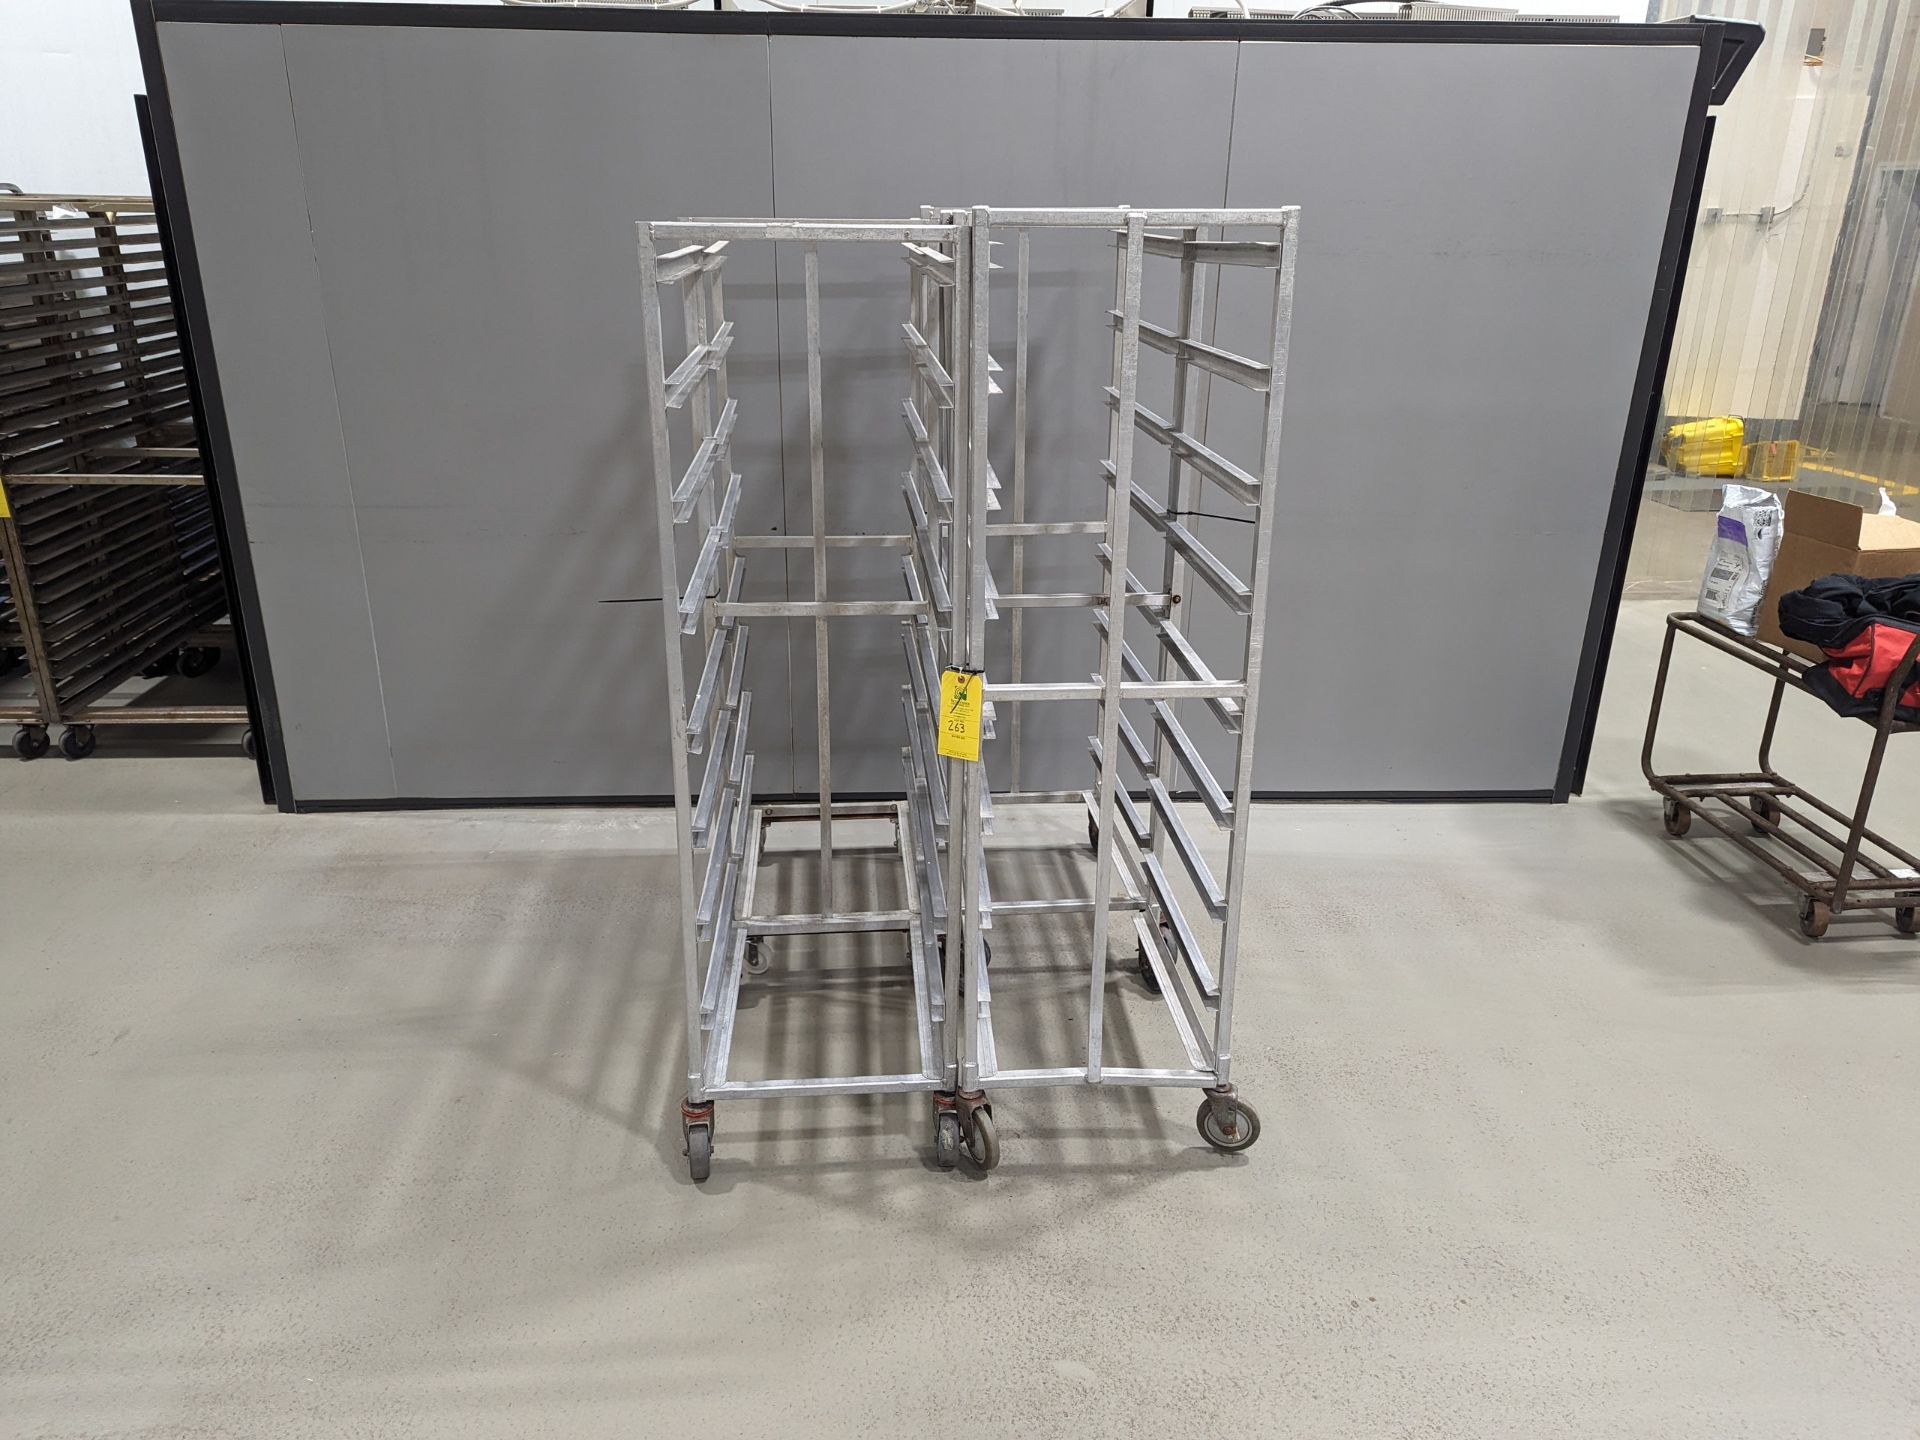 Lot of 4 Single Wide Aluminum Bakery Racks, Dimensions LxWxH: 57x37.5x69 Measurements are for lot